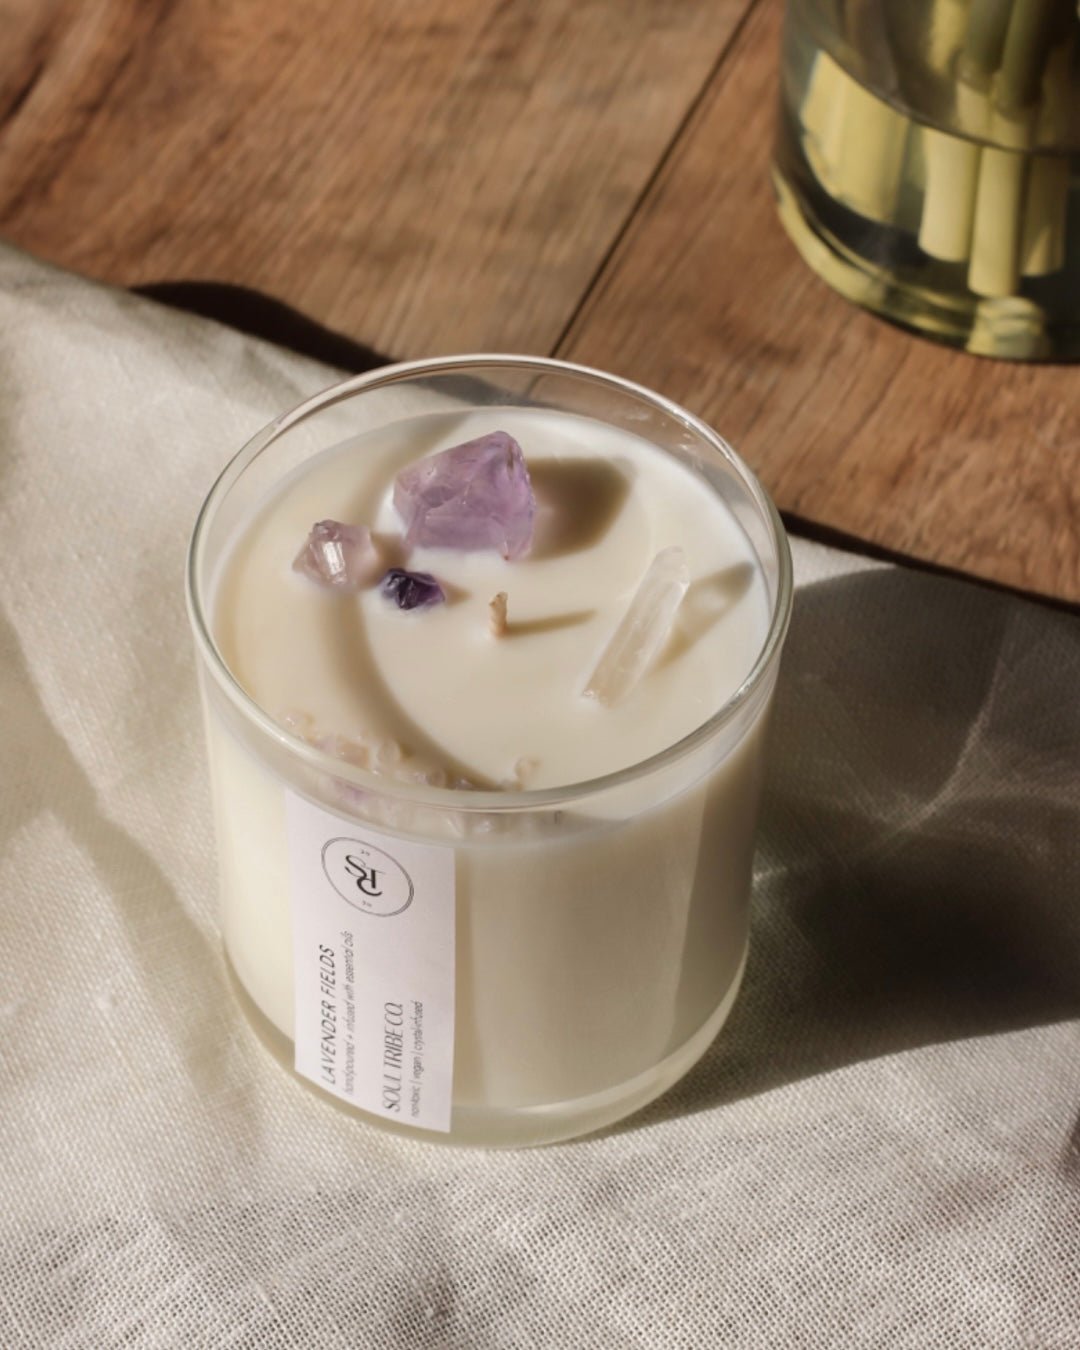 Lavender Fields Candle - Soul Tribe Co.